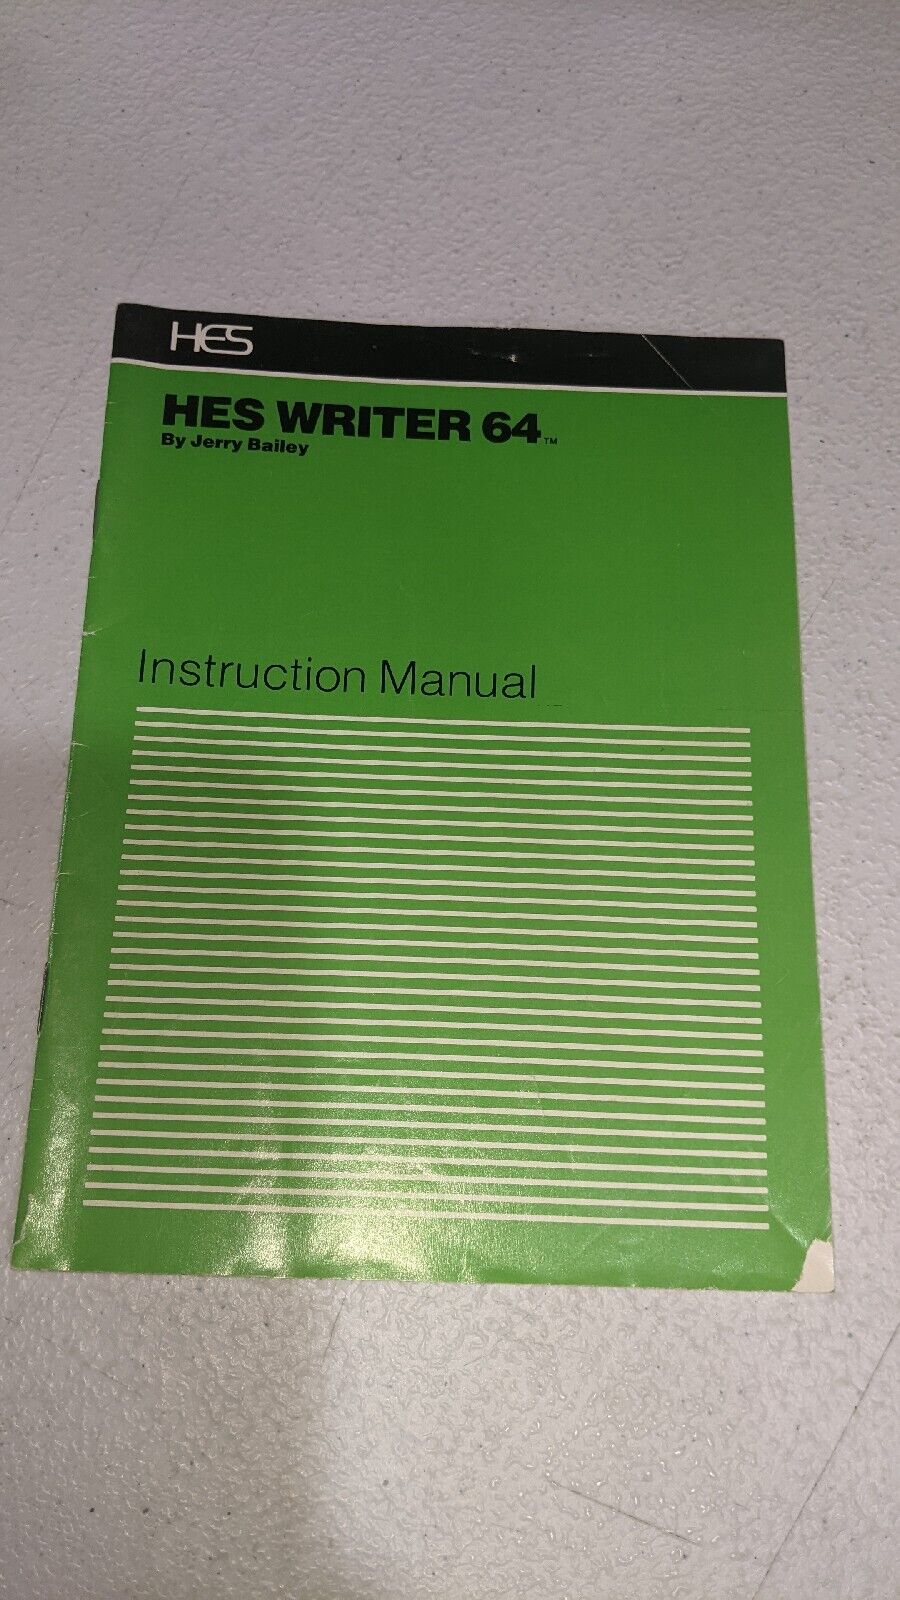 VTG Hes Writer 64 Instruction Manual HESWARE For Commodore 64